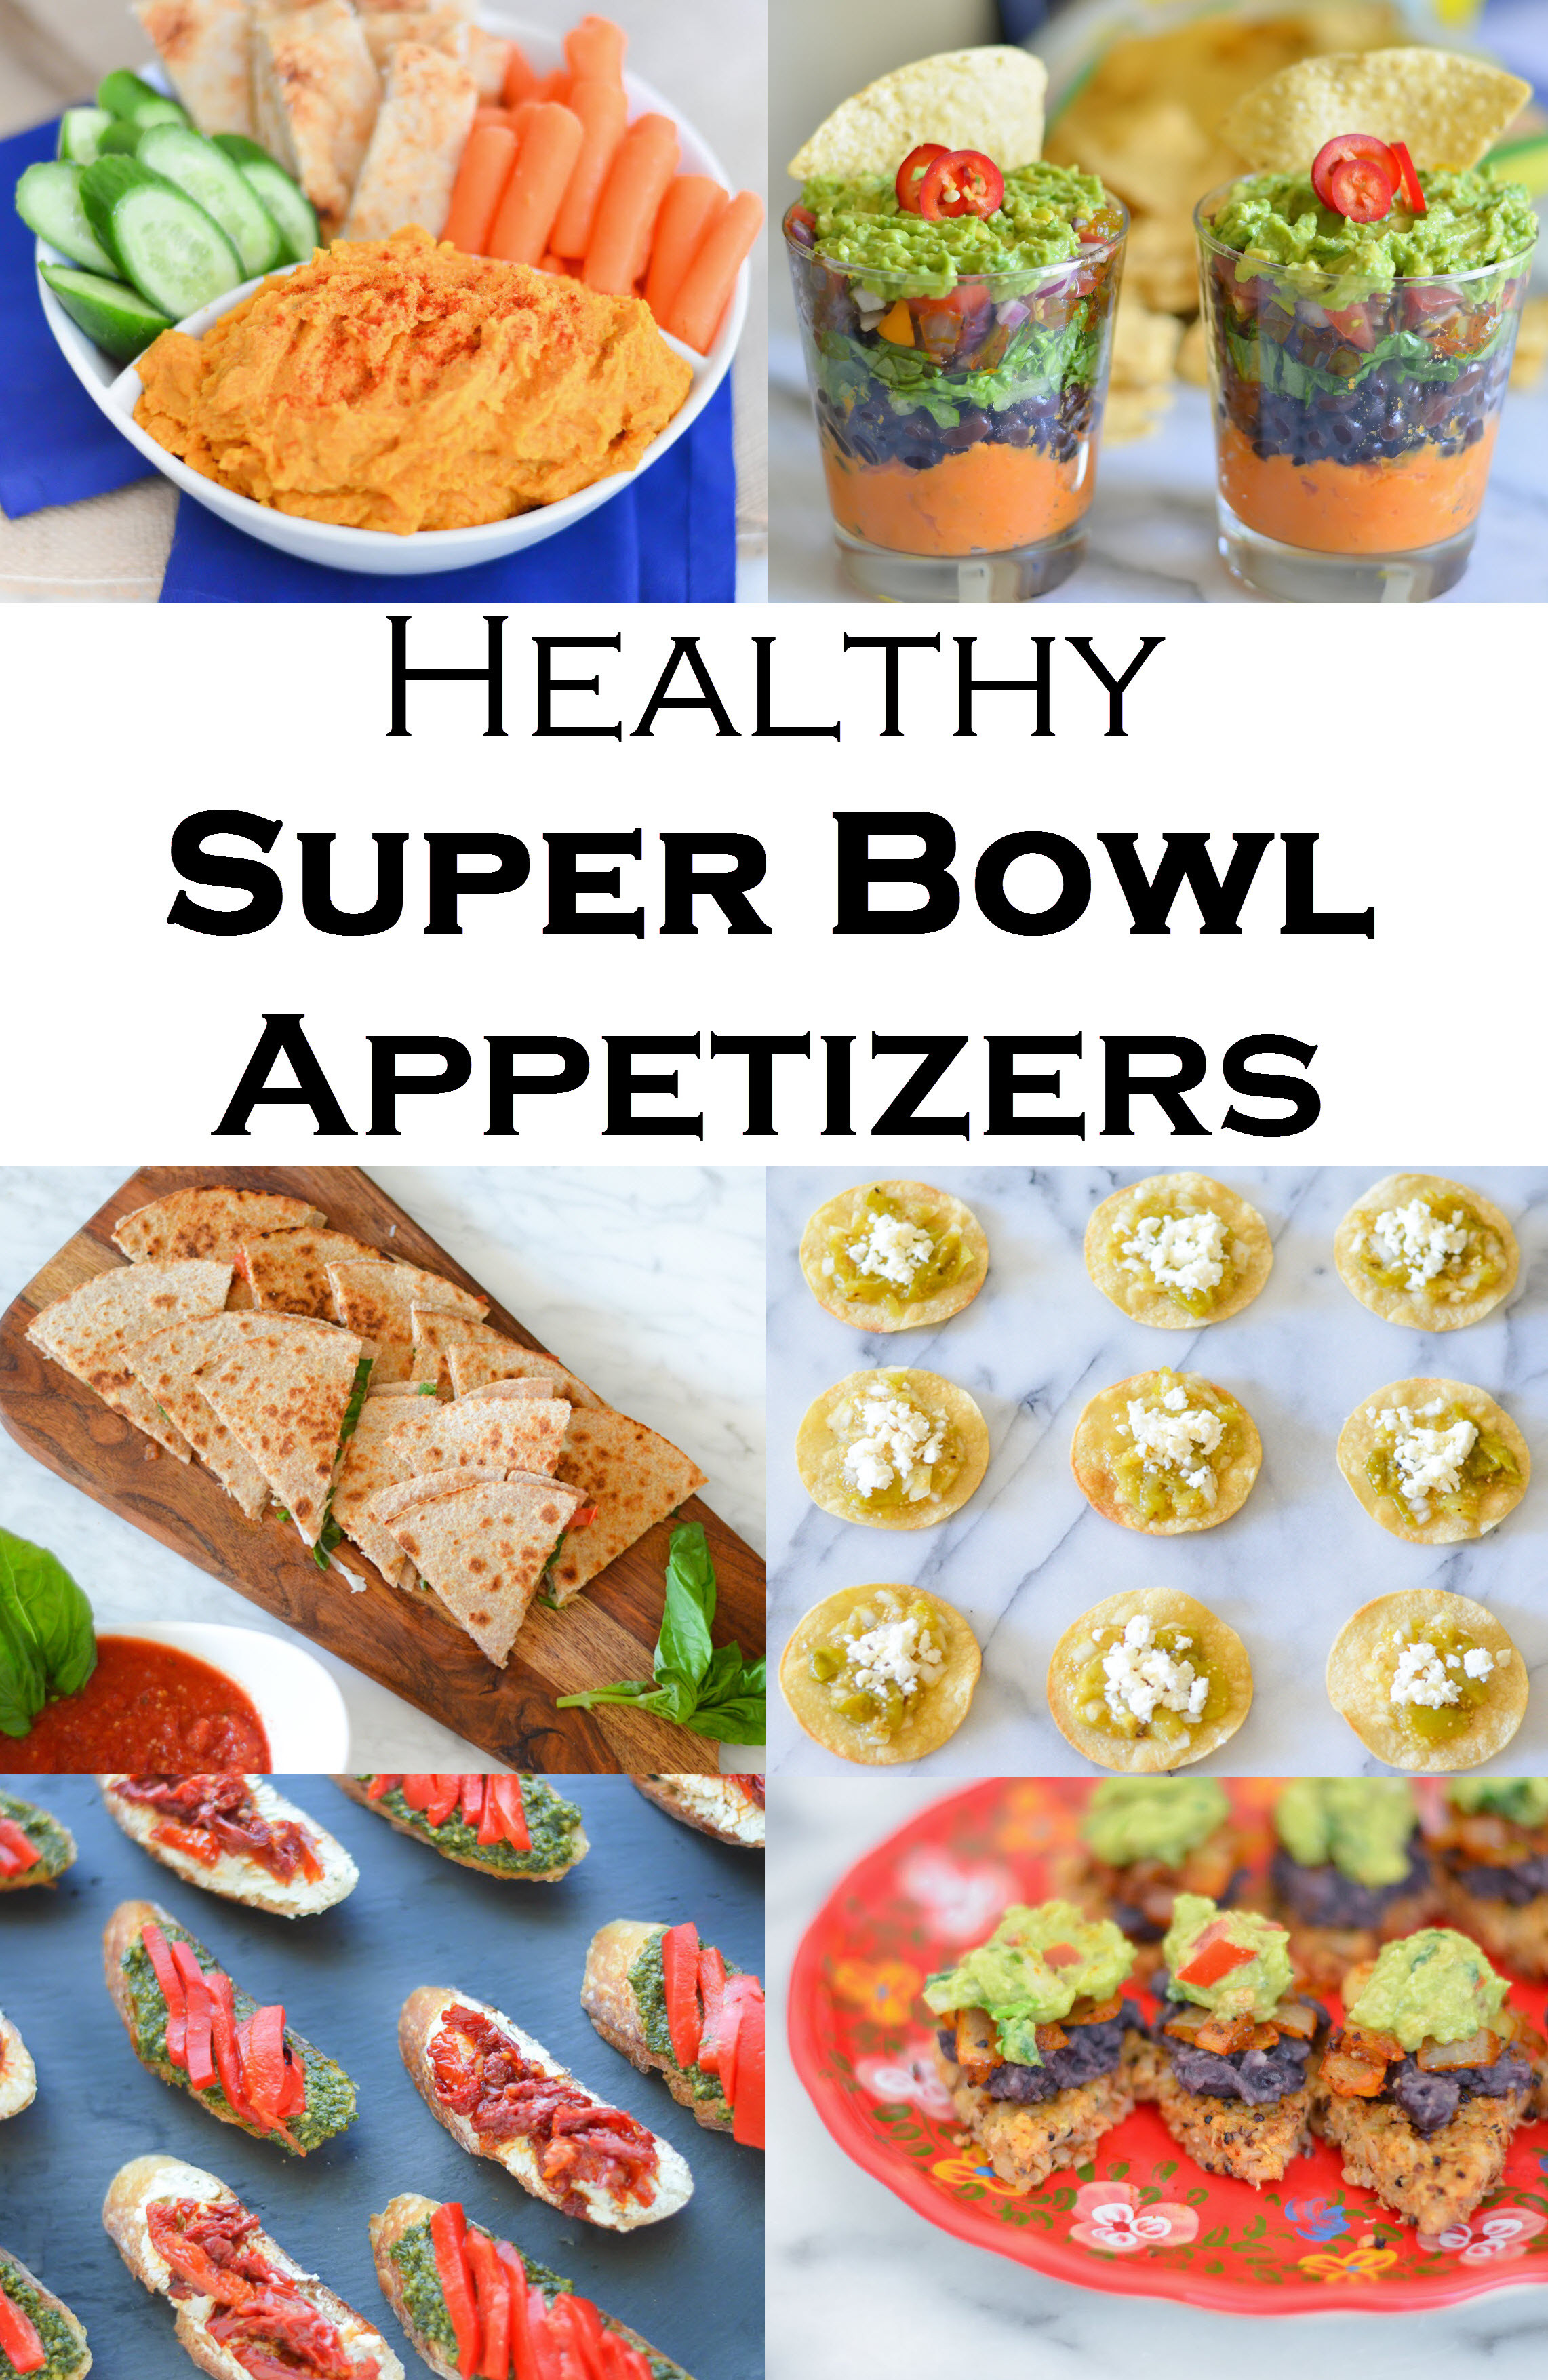 Healthy Superbowl Appetizers
 Healthy Super Bowl Recipes For Everyone